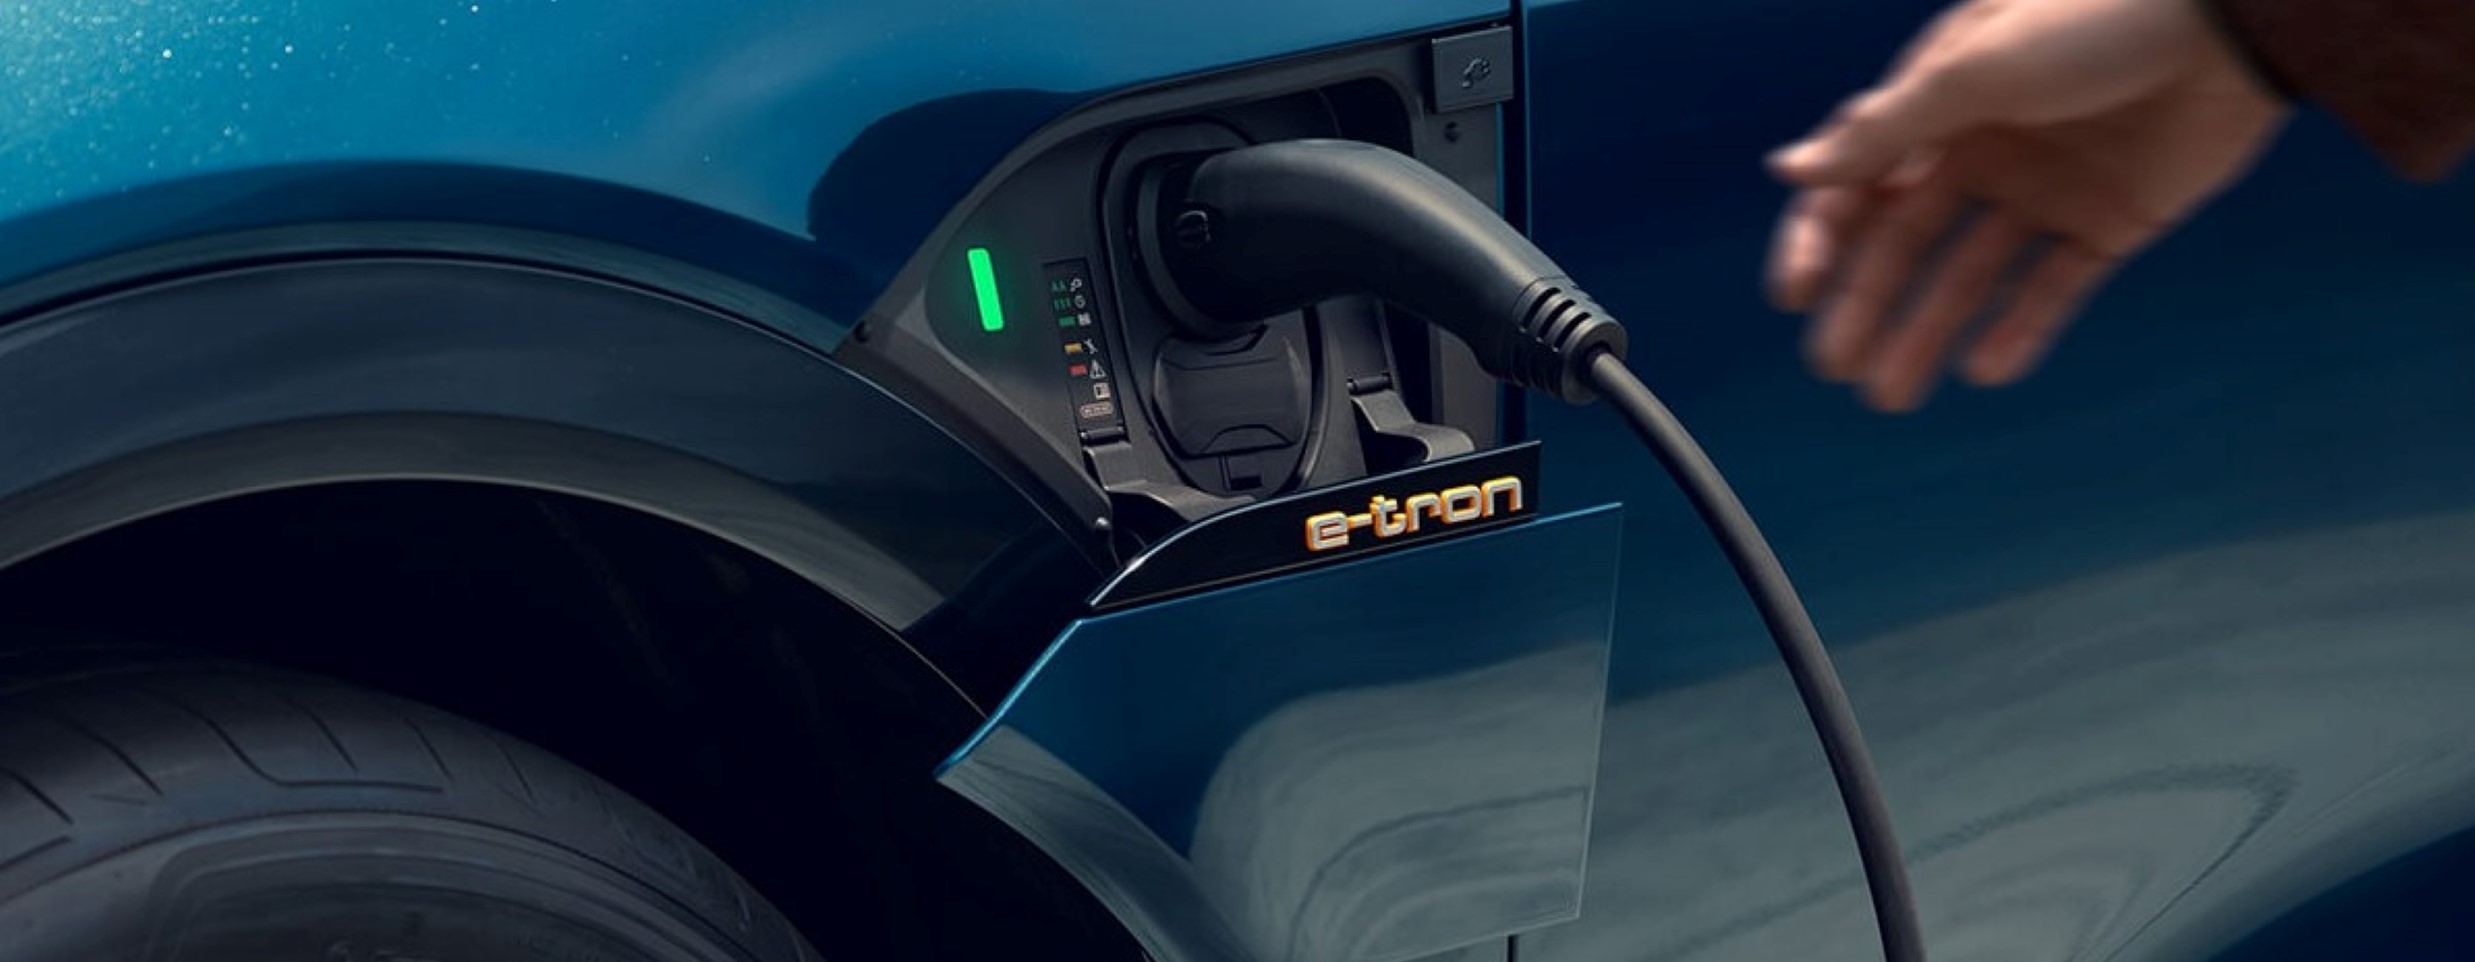 Octopus Energy > The Home of Electric > Audi UK